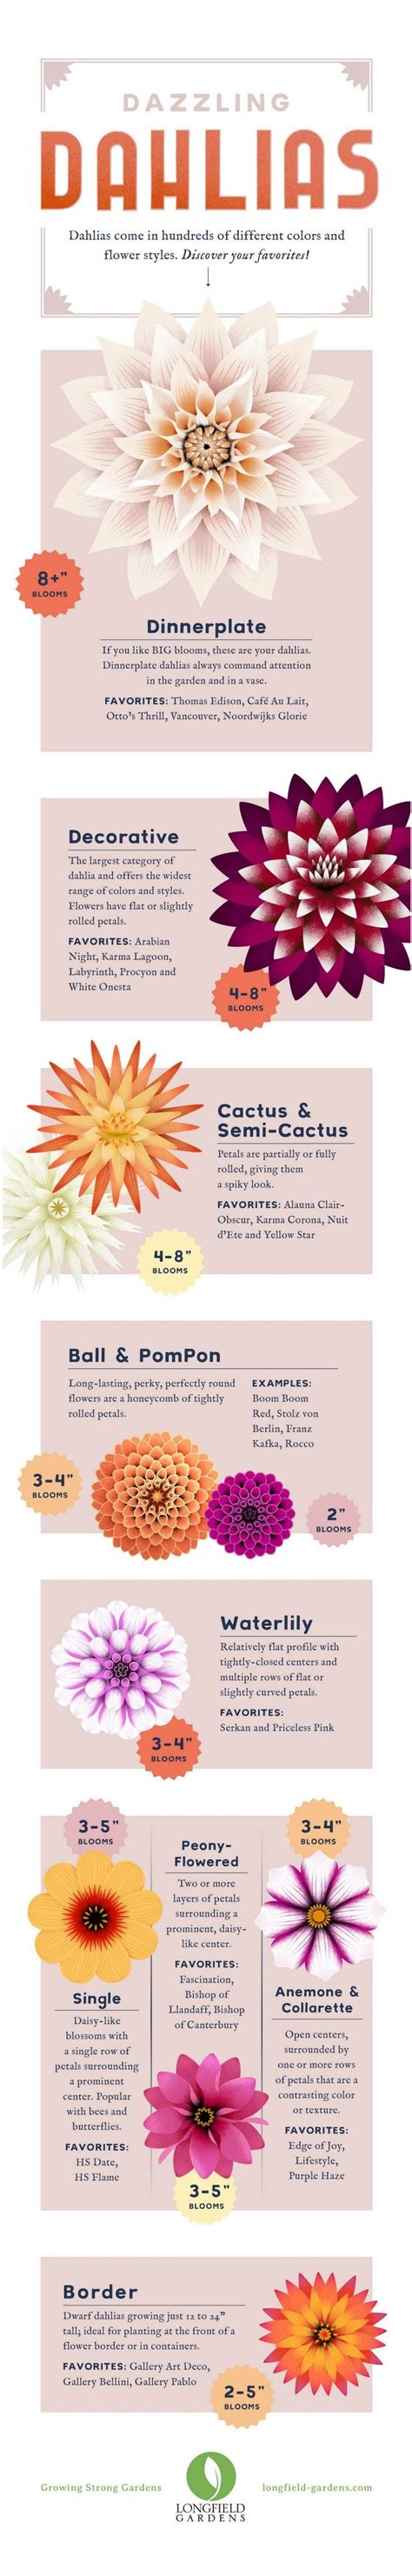 Dahlias Are Available In Many Colors Sizes And Flower Styles This